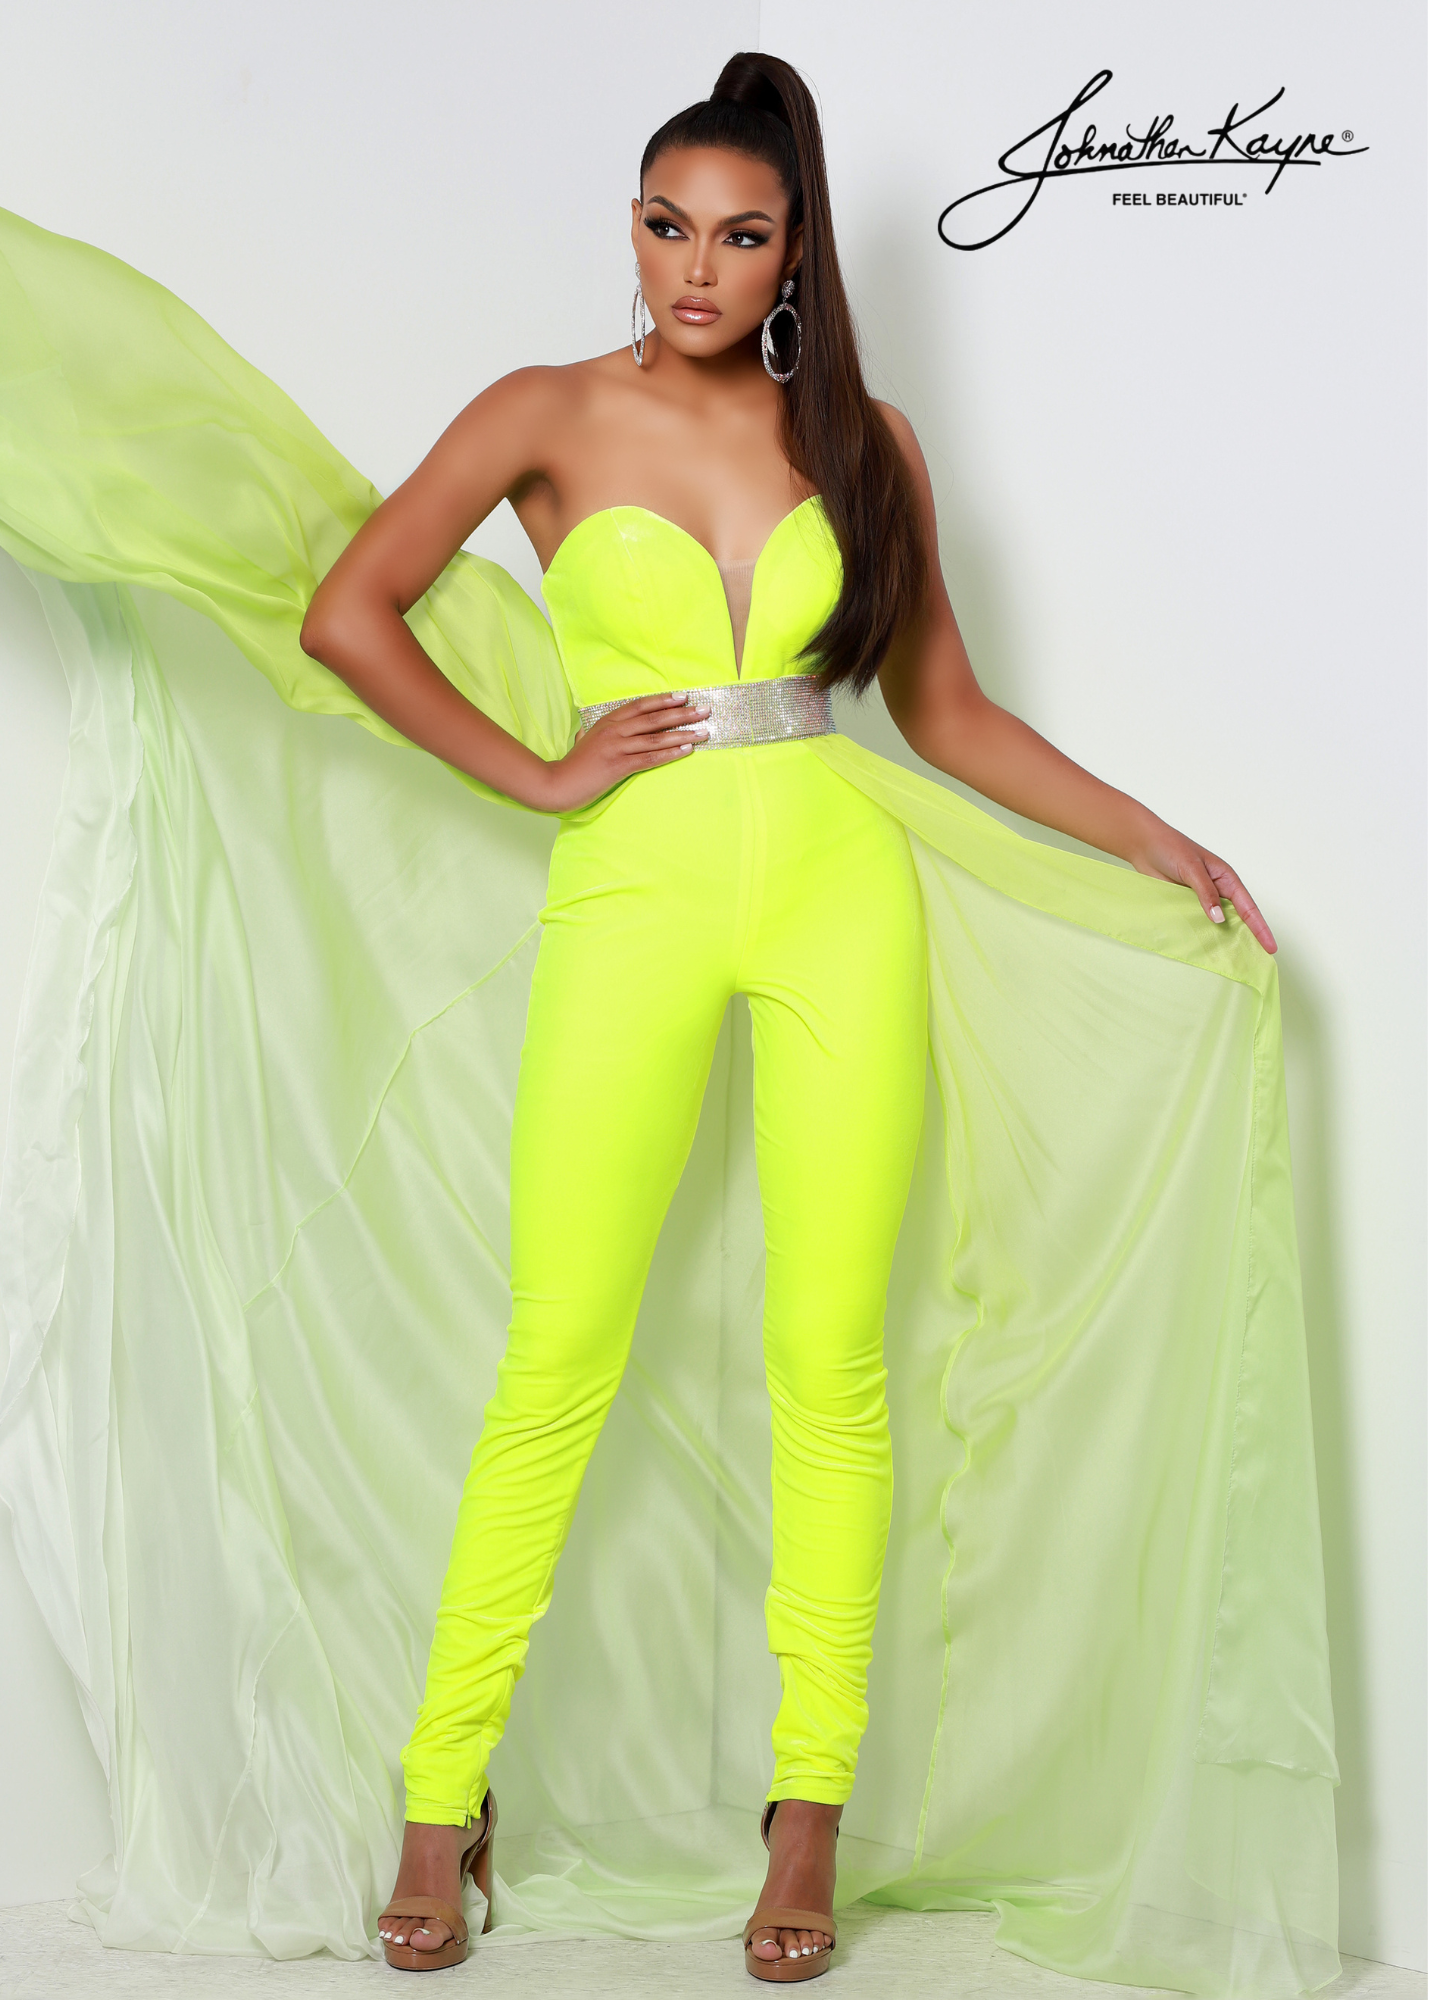 Johnathan Kayne 2609 Long Velvet Jumpsuit Chiffon Overskirt Crystal Waist Pageant Fun Fashion Rock out your next fun fashion event in this dazzling stretch velvet fitted jumpsuit with detachable ombre chiffon overskirt. The rhinestone waist band will be sure to highlight your waist!  Sizes: 10  Colors: Neon Yellow